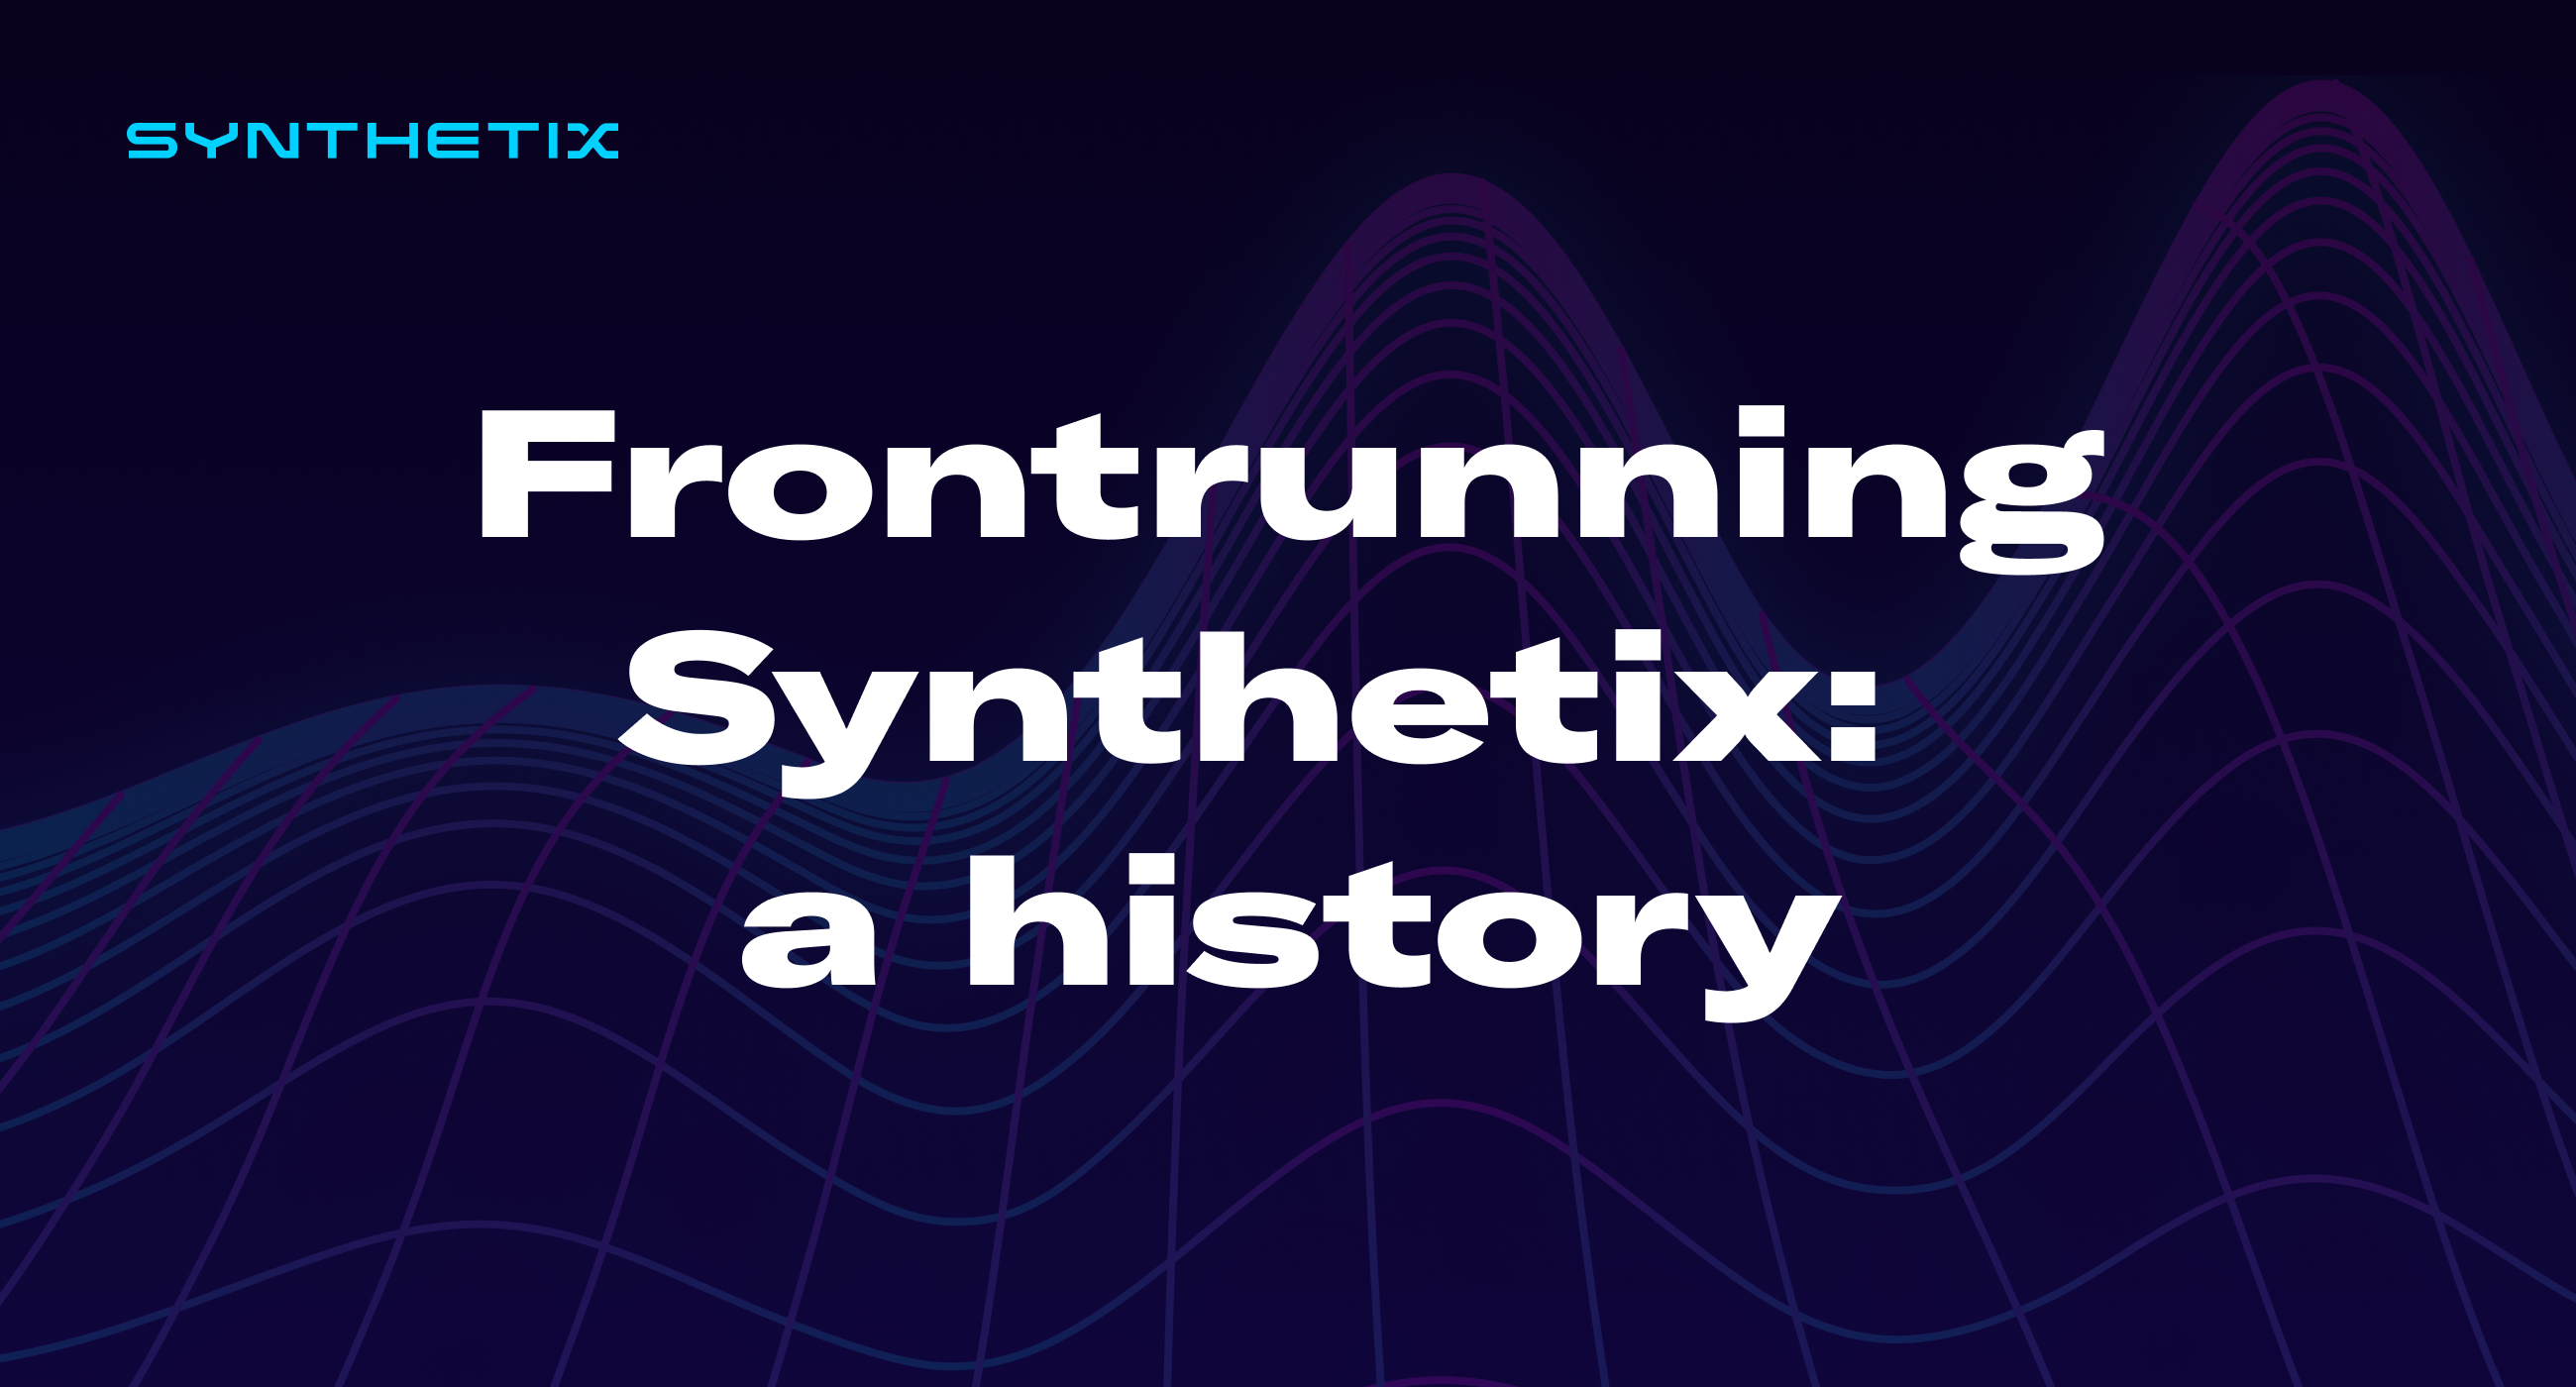 Frontrunning Synthetix: a history